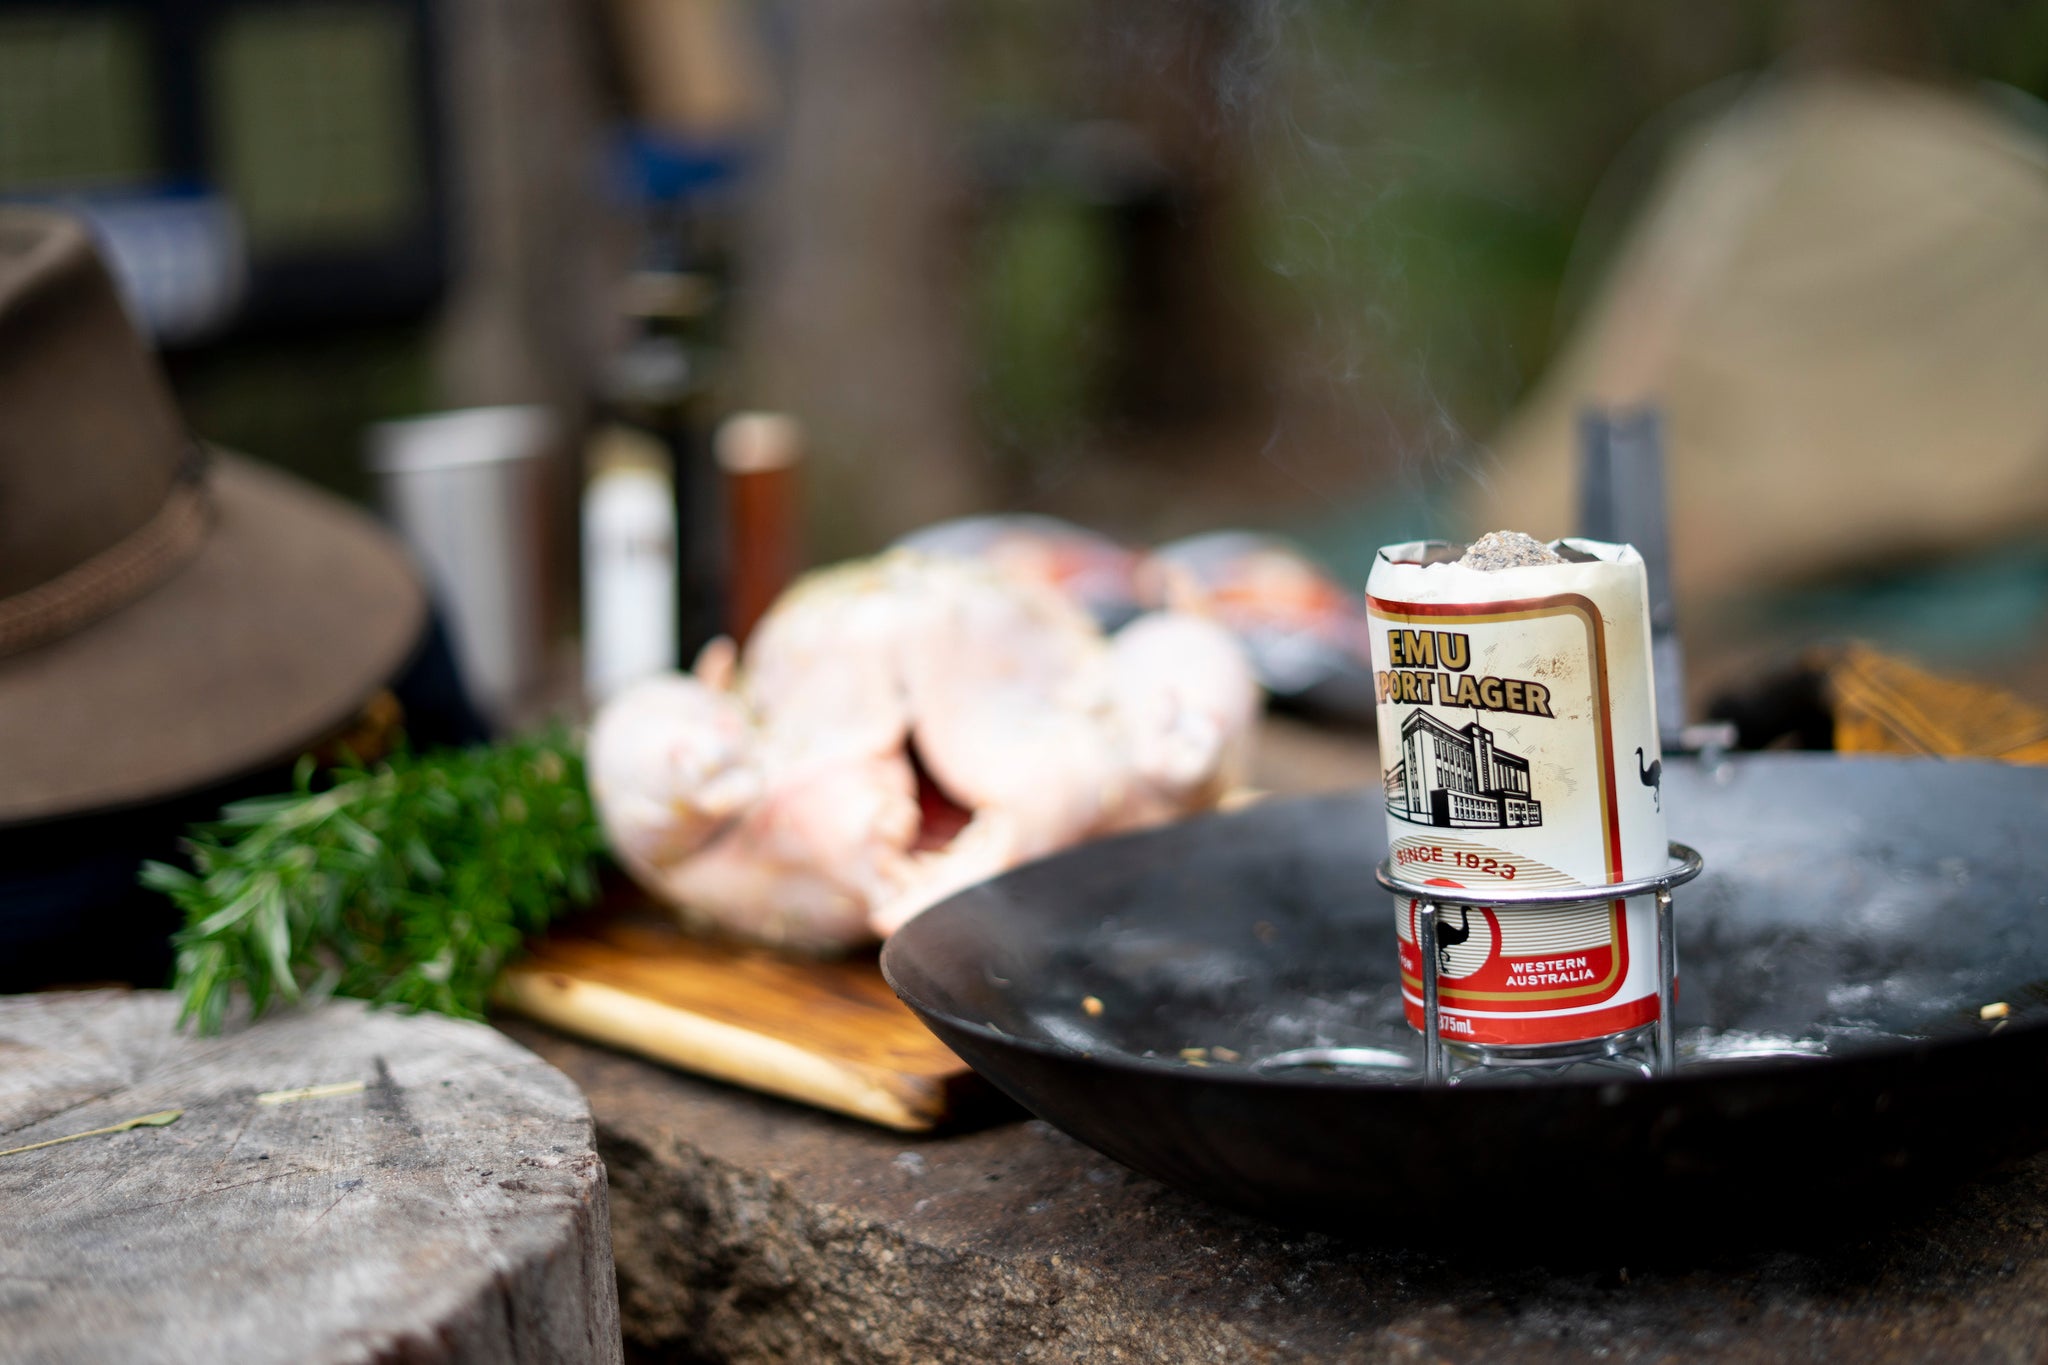 beer can chicken is easier than you think. you just need to start with really hot beer. the steam from the beer is what seals the chickens cavity and locks in the yummy juices. 